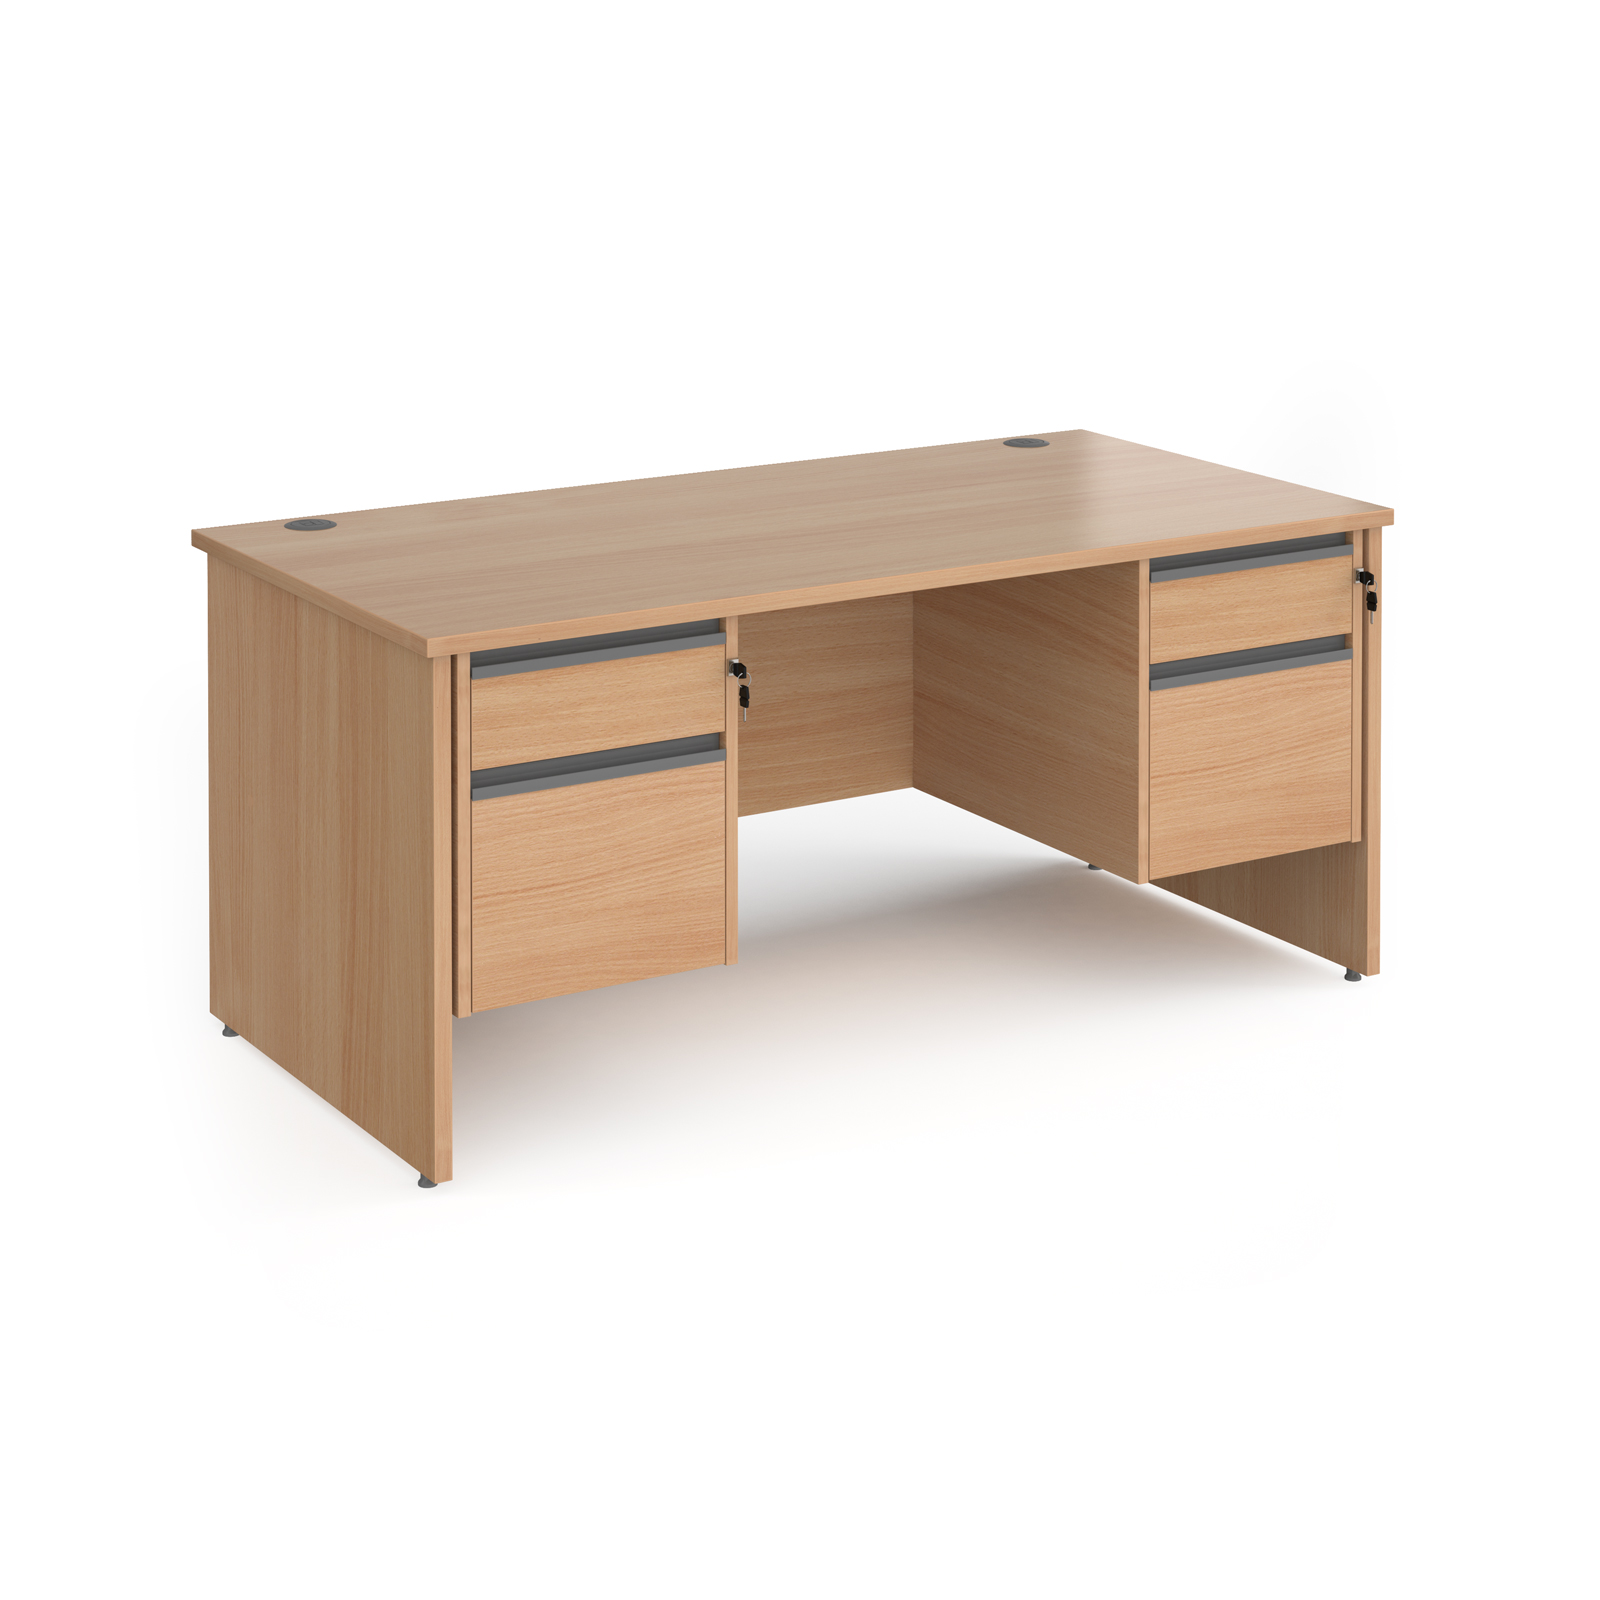 Contract 25 panel leg straight desk with 2 and 2 drawer peds